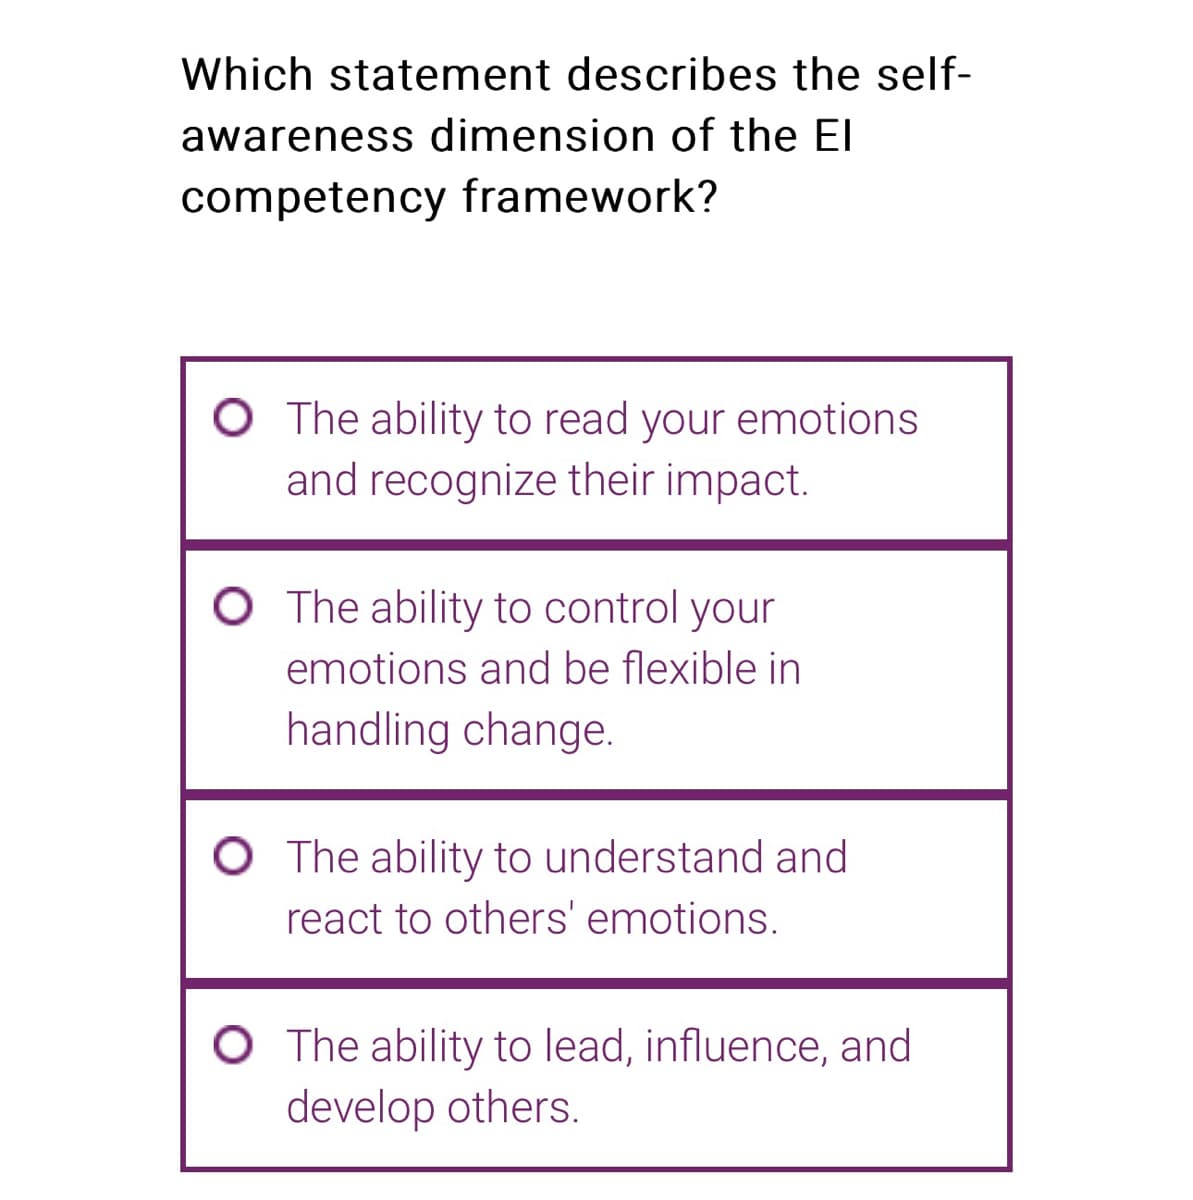 Which statement describes the self-
awareness dimension of the El
competency framework?
O The ability to read your emotions
and recognize their impact.
O The ability to control your
emotions and be flexible in
handling change.
O The ability to understand and
react to others' emotions.
O The ability to lead, influence, and
develop others.